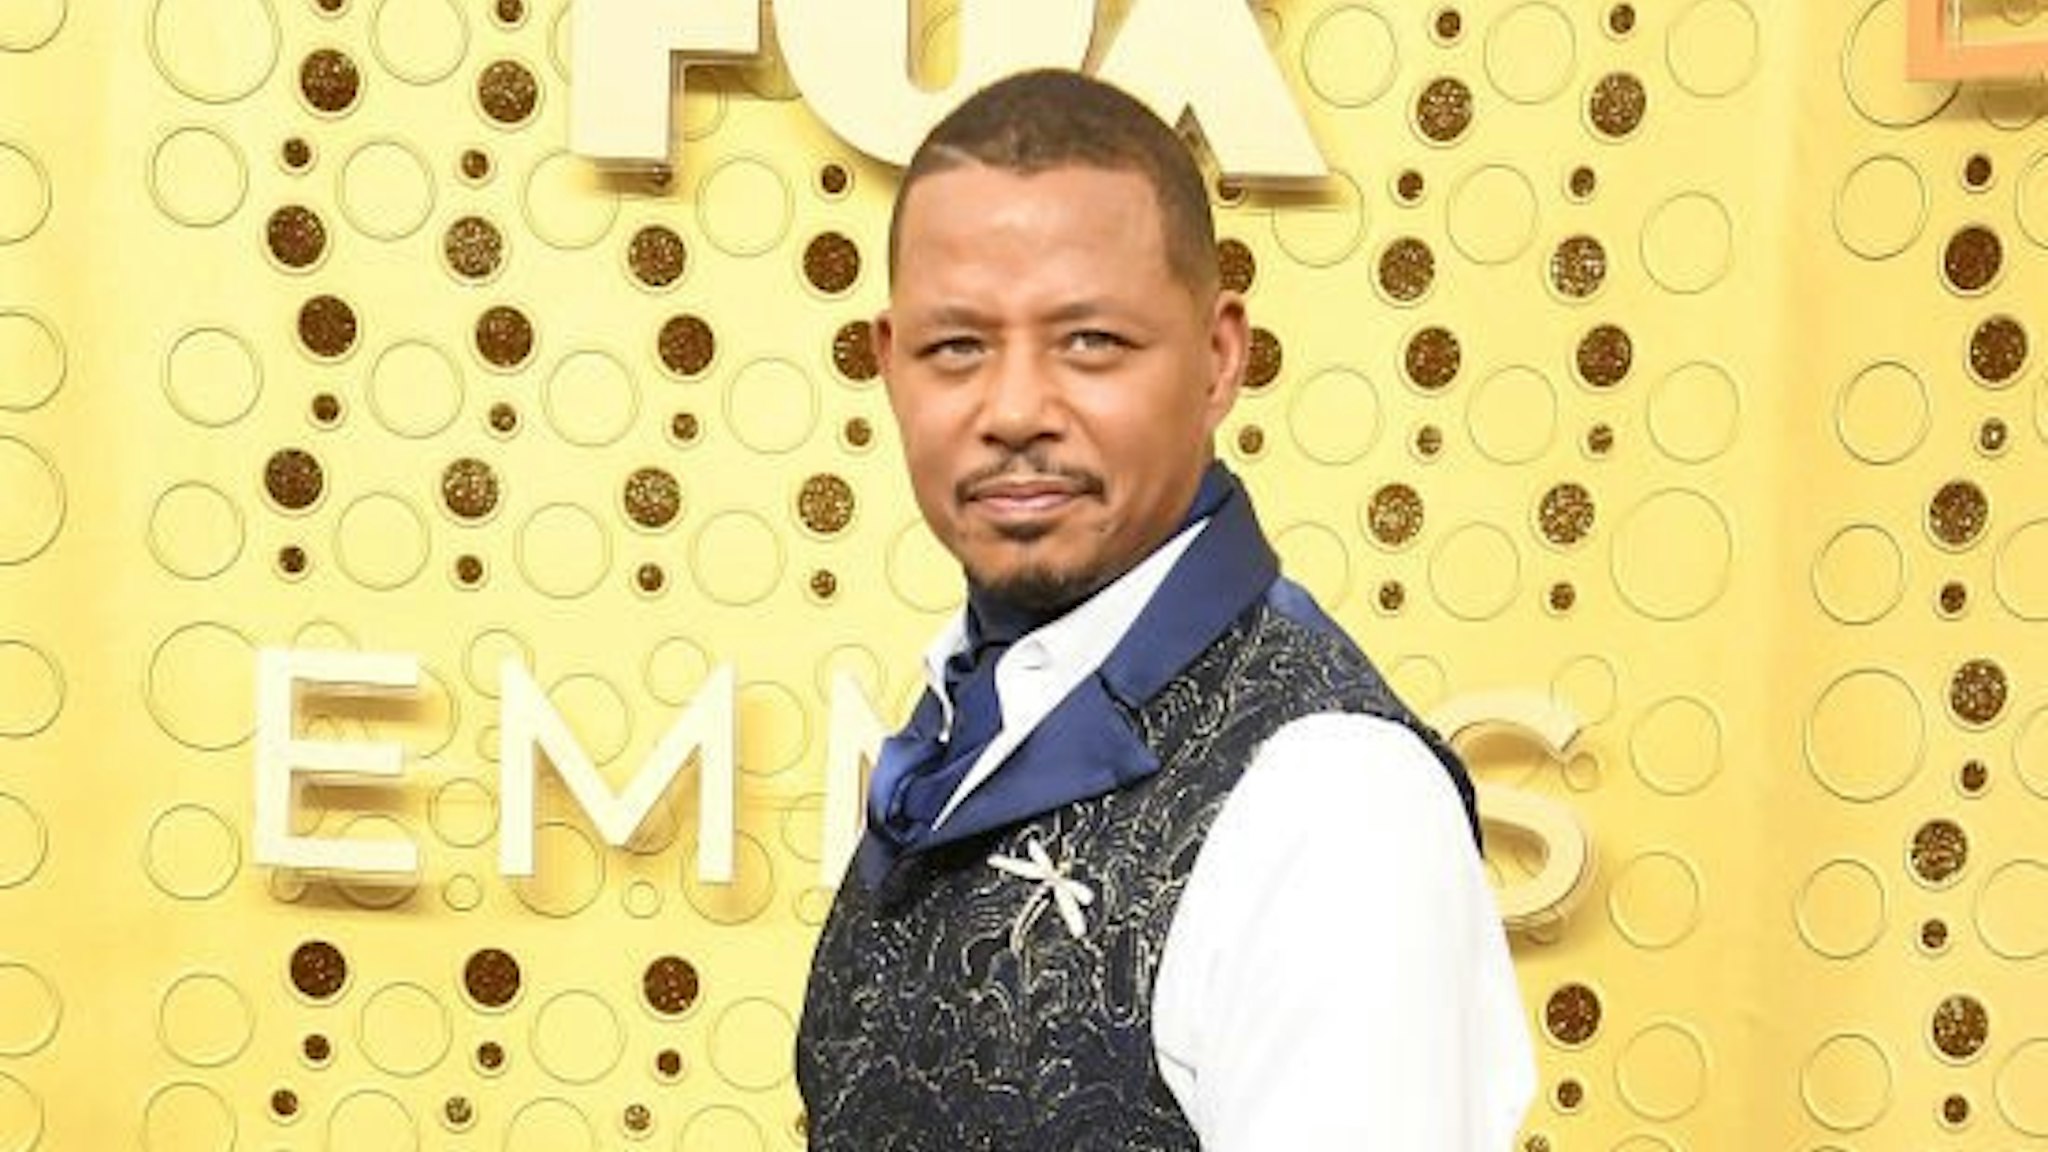 Terrence Howard arrives at the 71st Emmy Awards at Microsoft Theater on September 22, 2019 in Los Angeles, California.